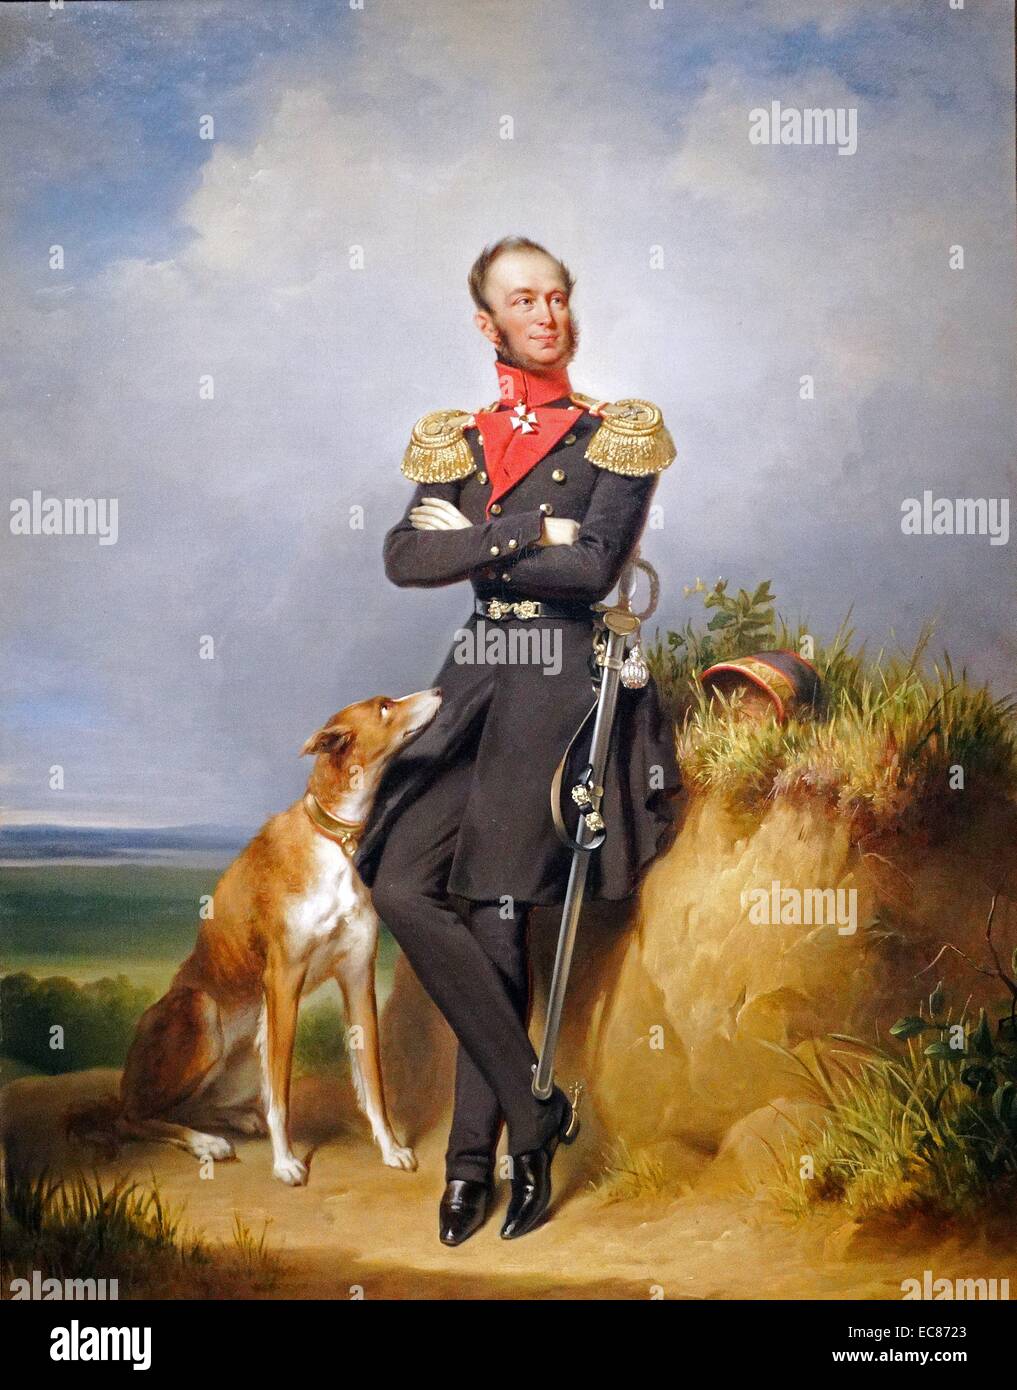 Portrait of William II, King of the Netherlands. Painted by Jan Adam Kruseman (1804-1862). Dated 1839 Stock Photo